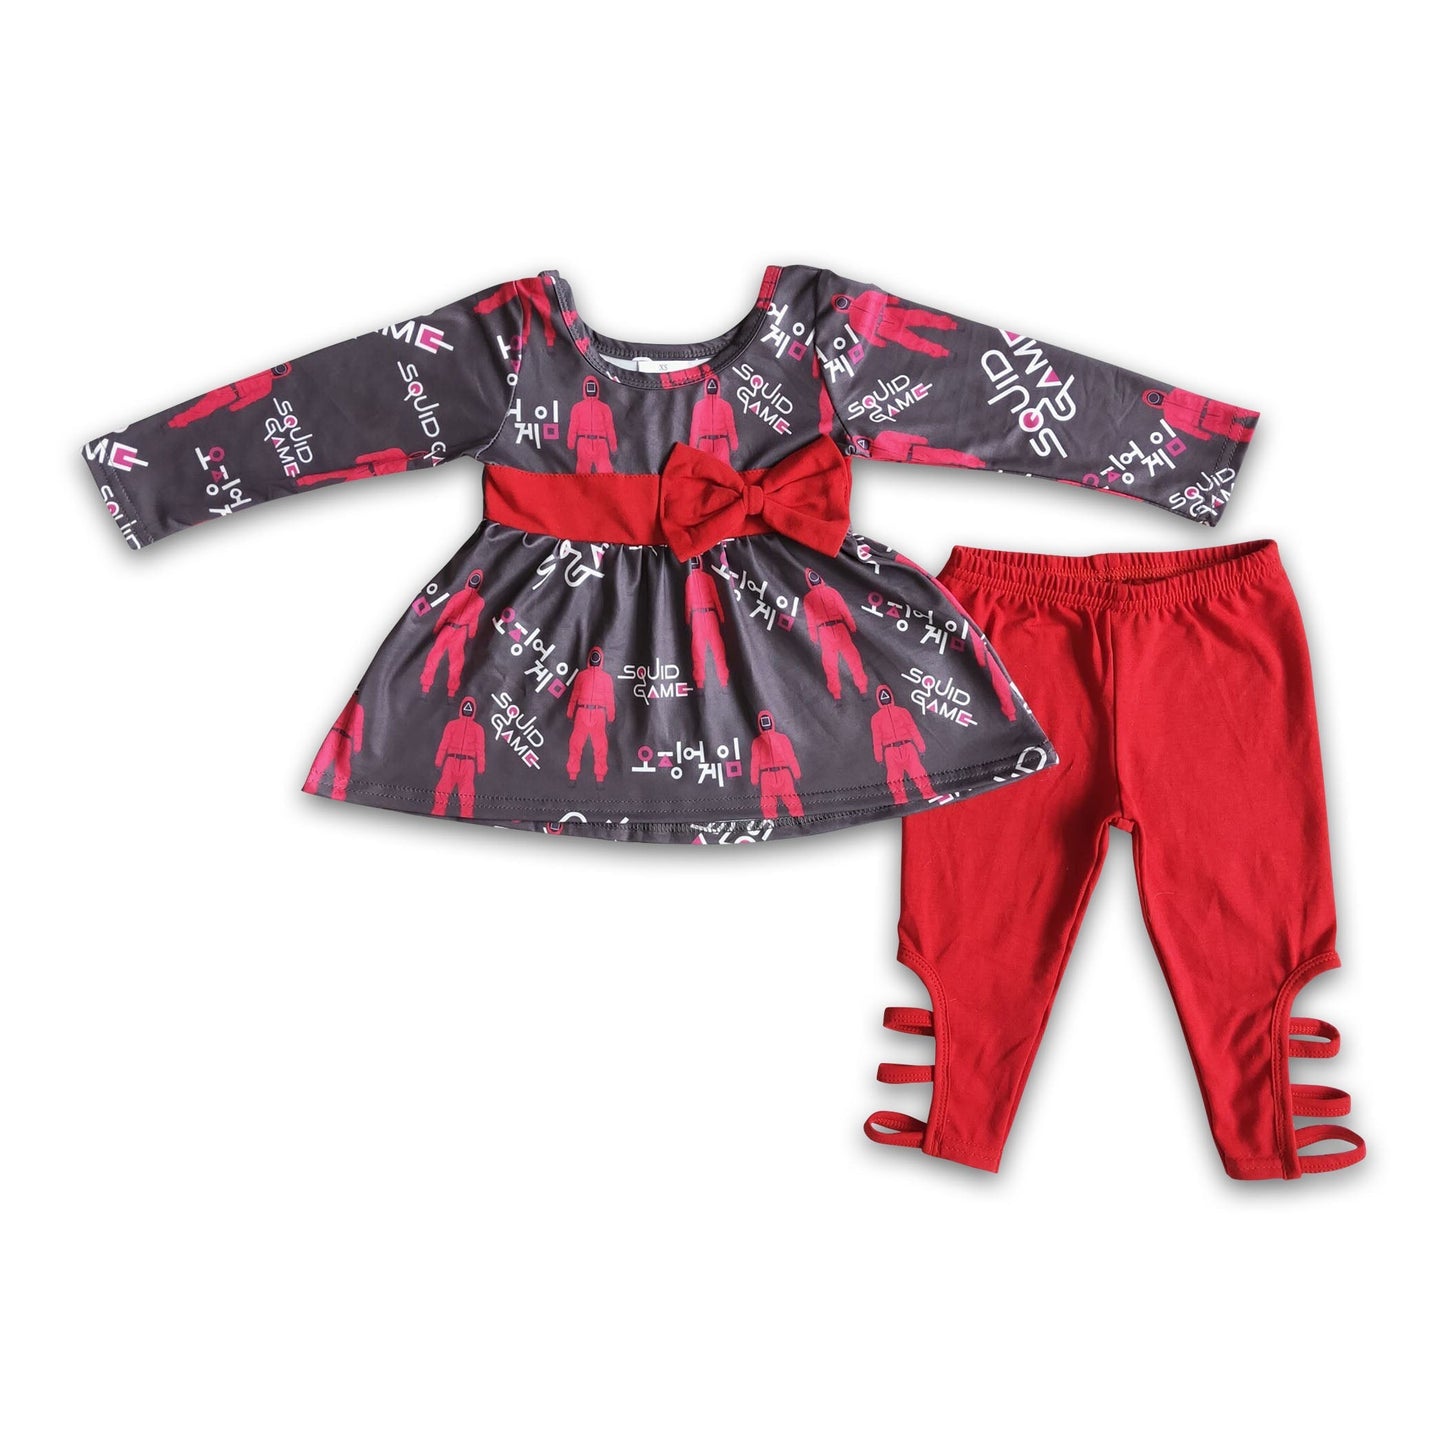 Red bow tunic match criss cross leggings girls boutique clothing